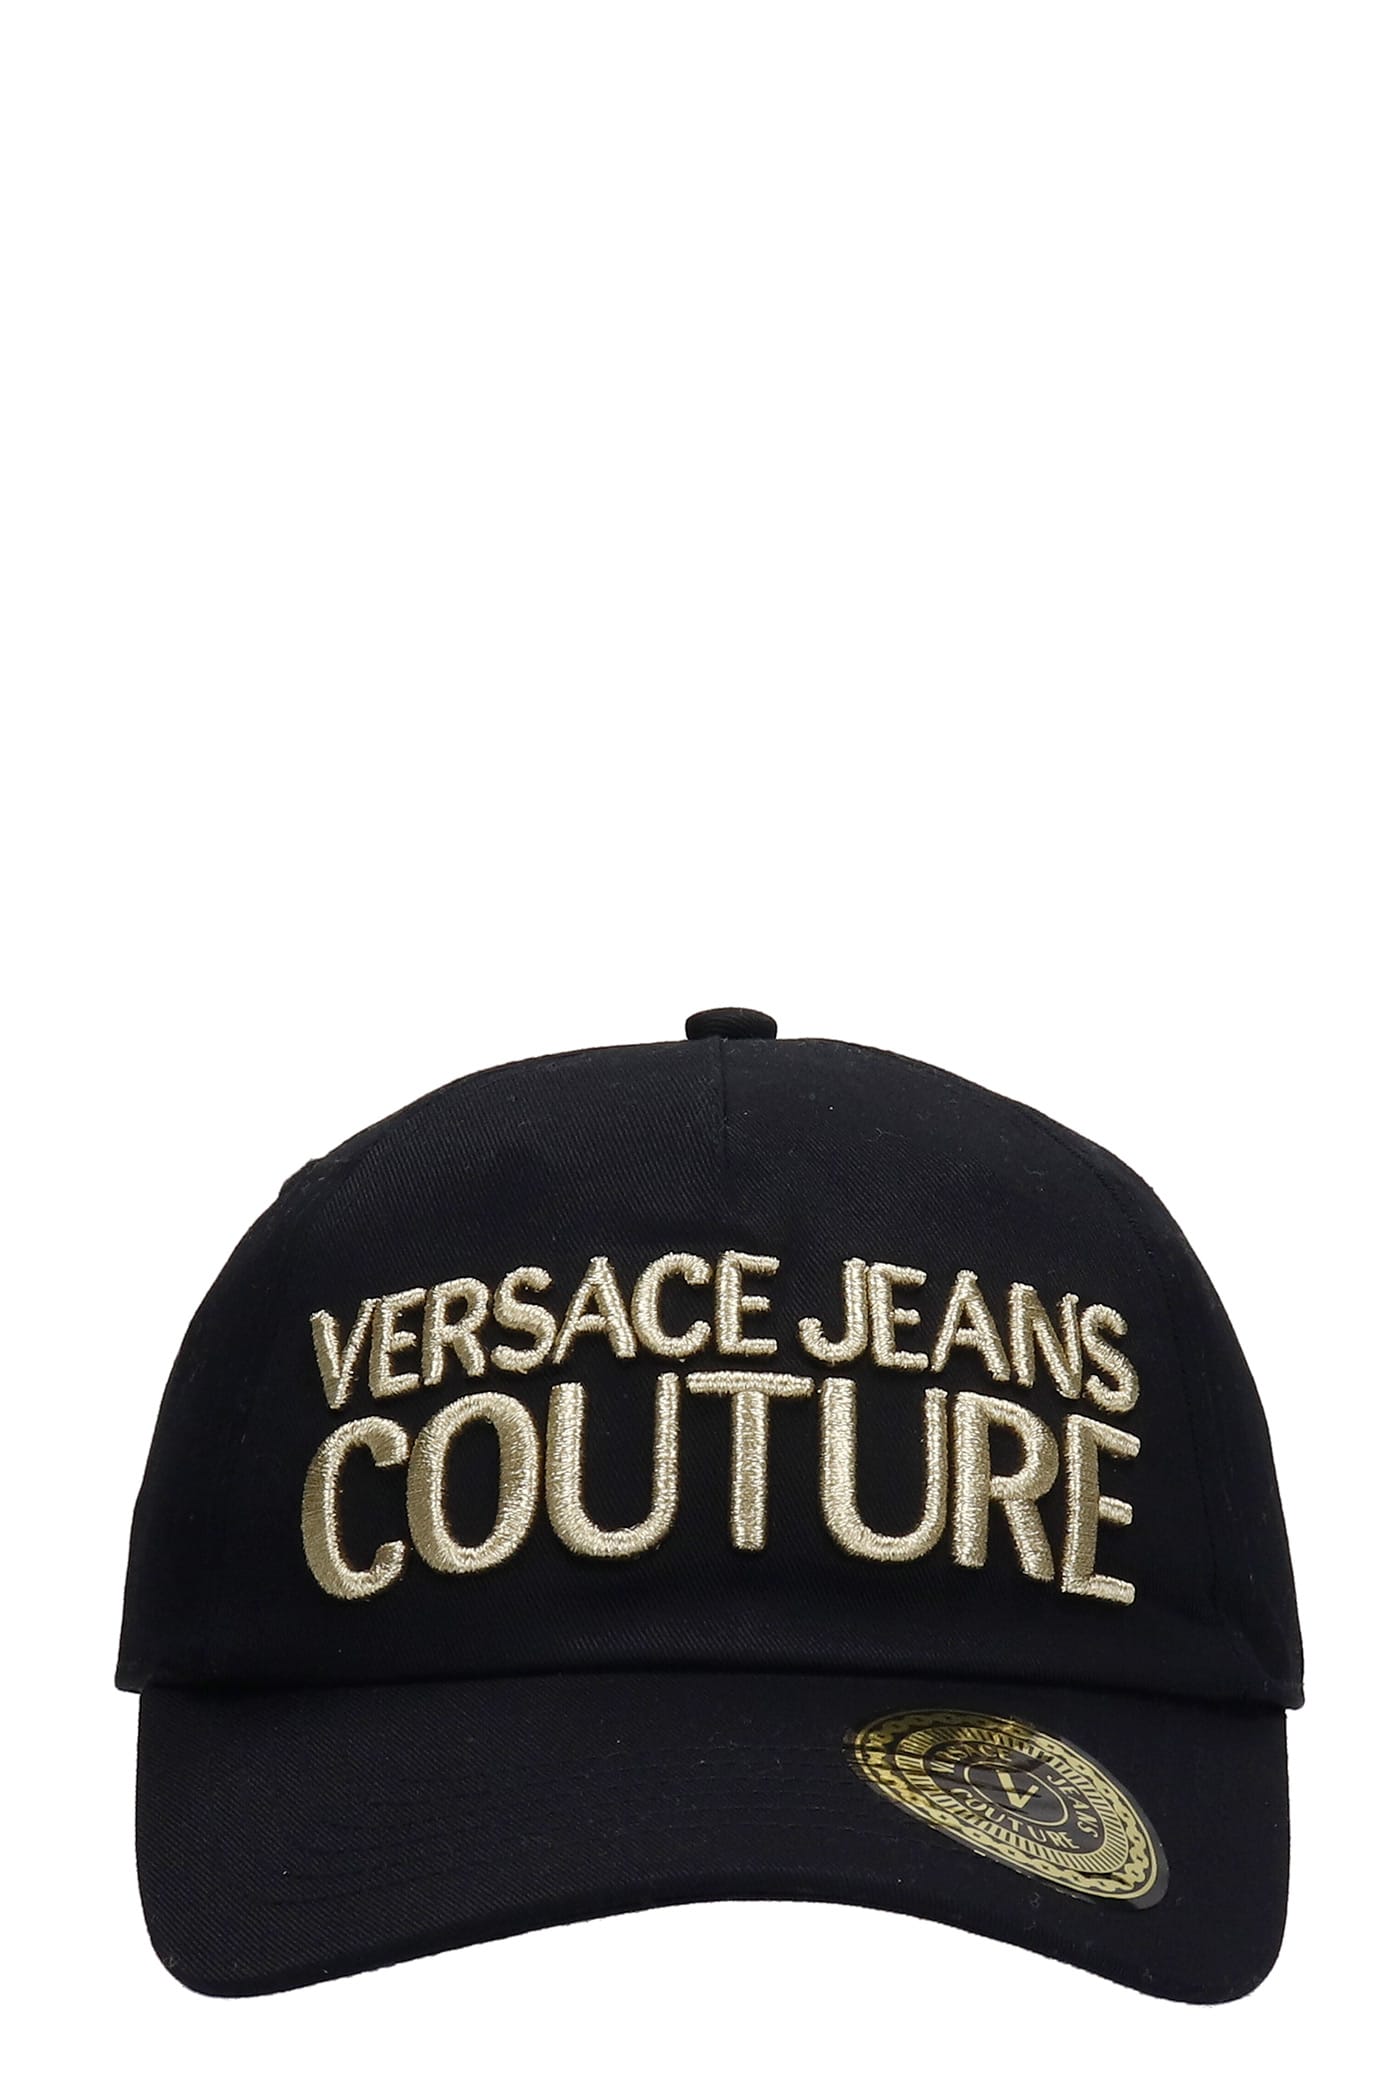 Versace Jeans Couture Hats In Black Cotton